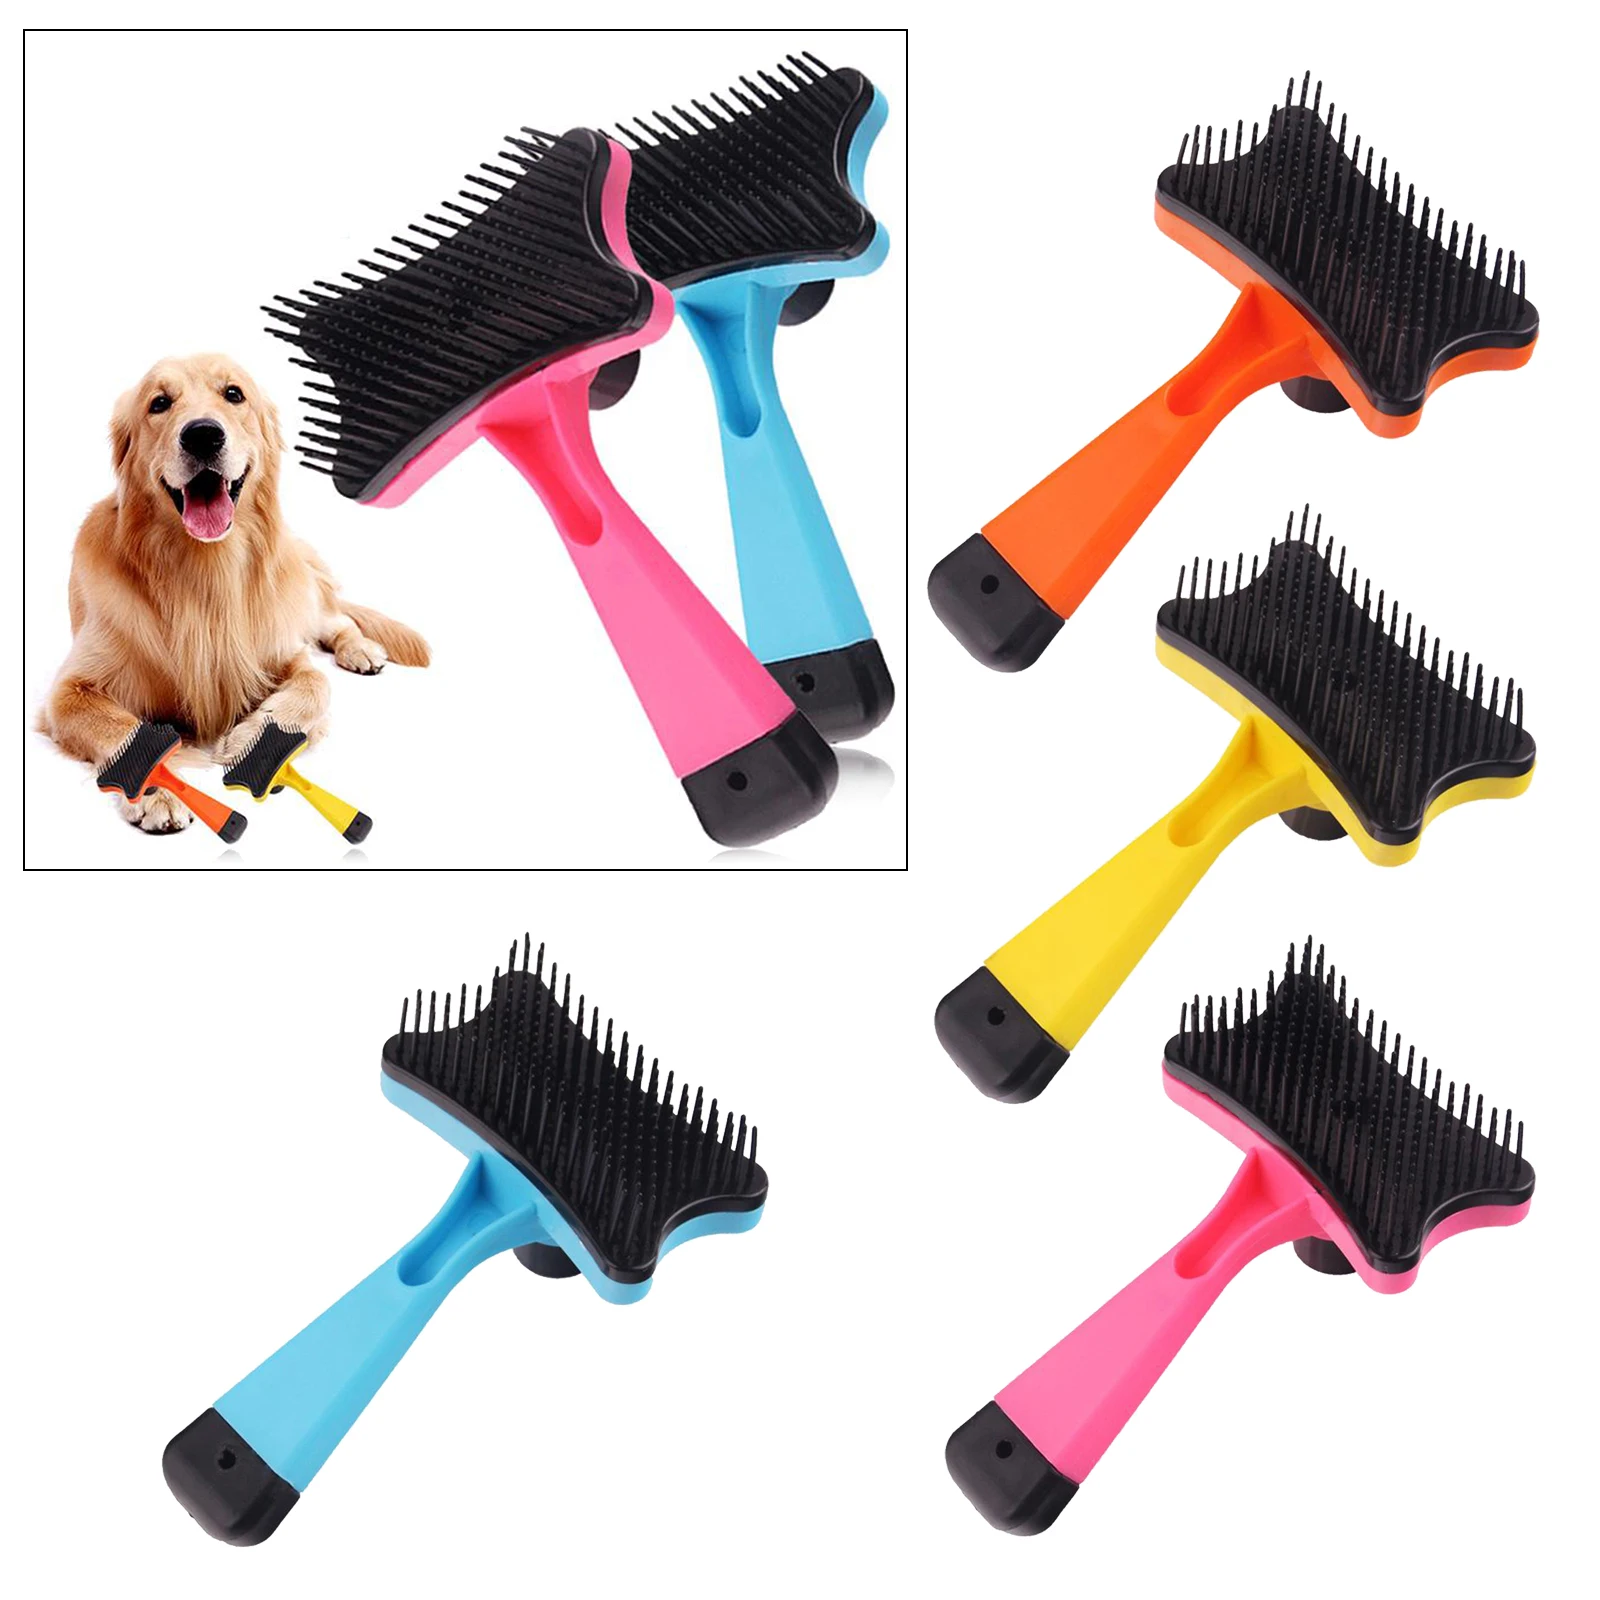 

Pet Hair Removal Comb Cats Dog Grooming Brush Puppy Kitten Hair Shedding Trimmer Combs Pets Grooming Tools